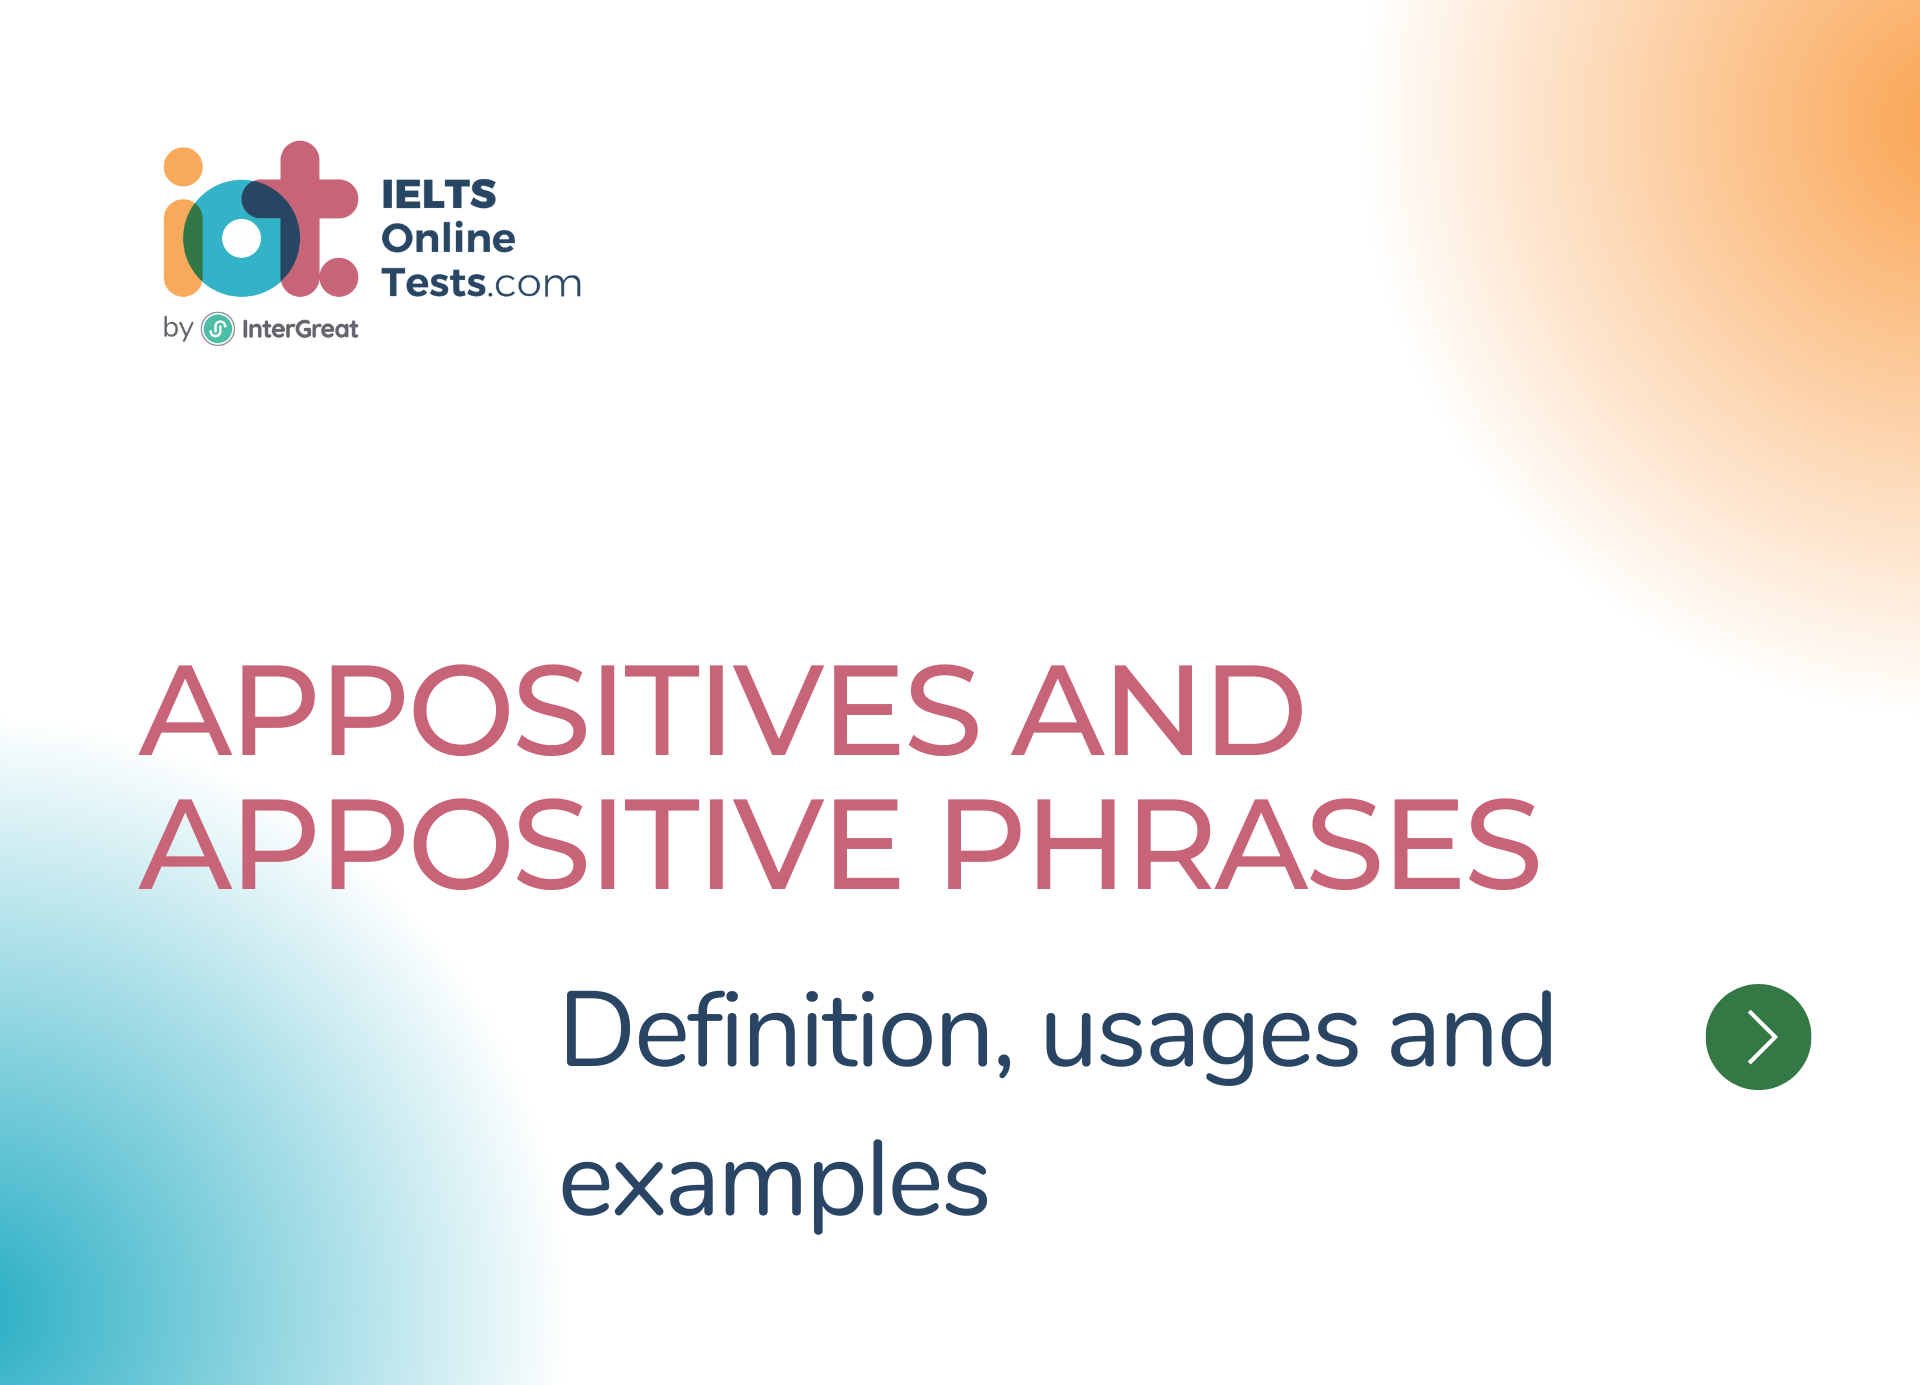 What Are Appositives And Appositive Phrases